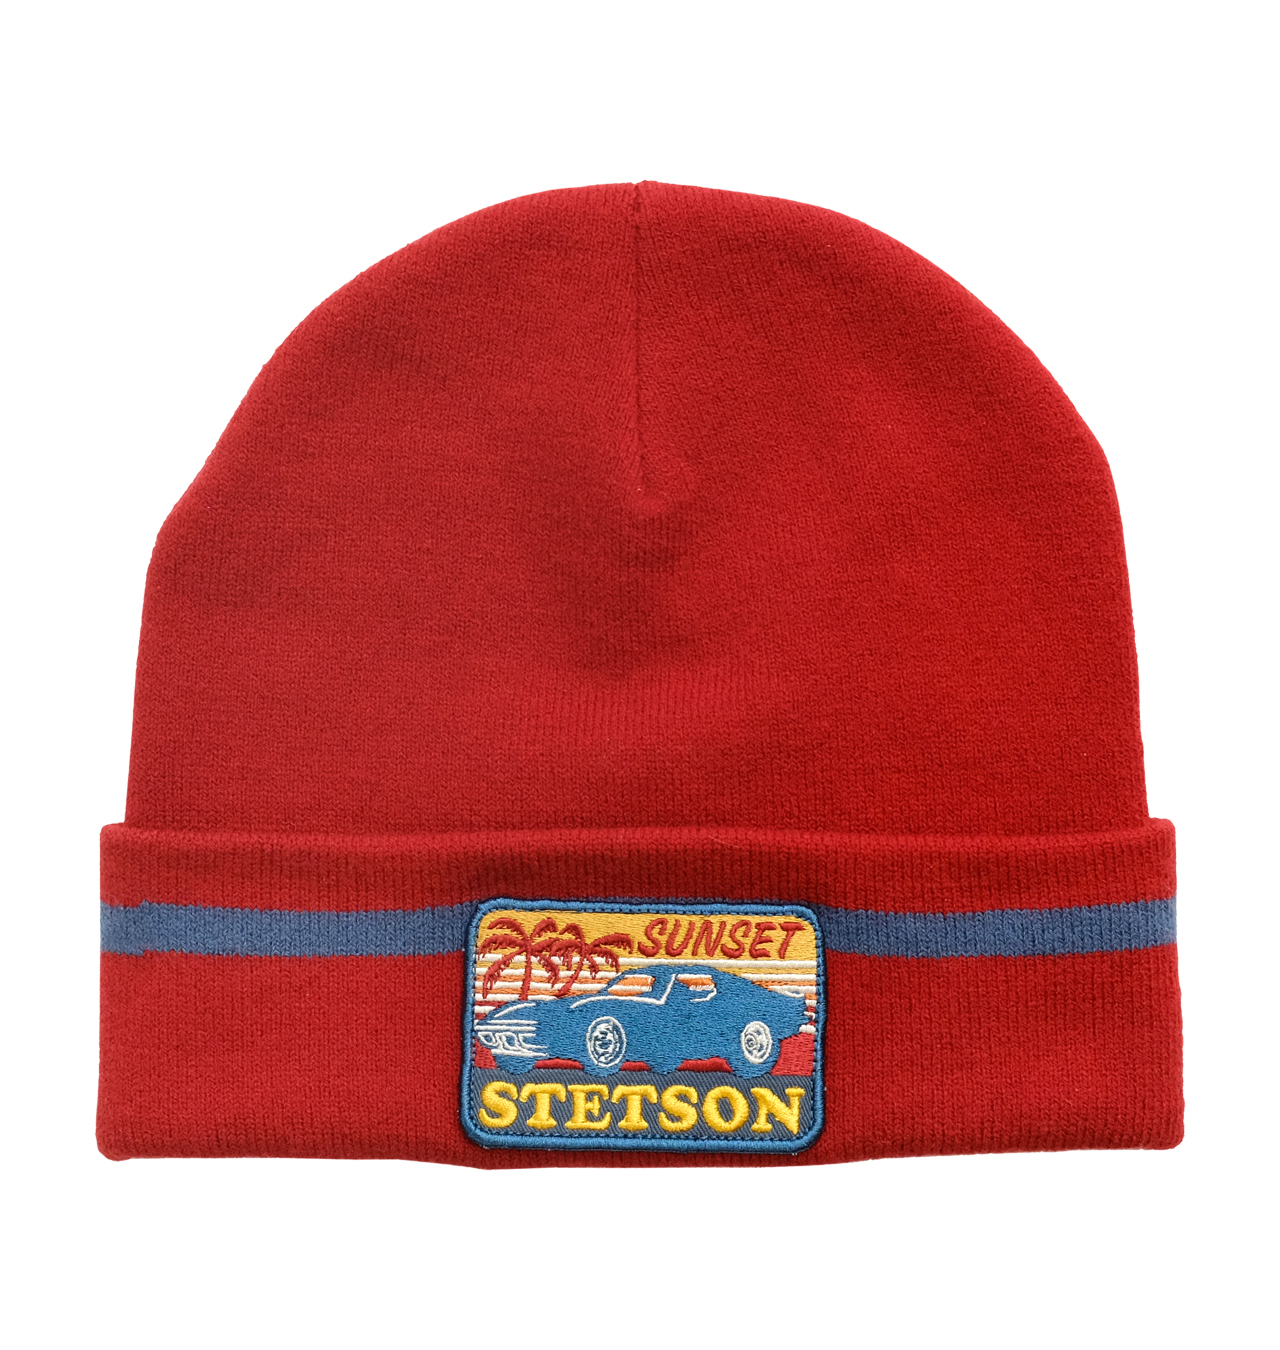 Stetson - Sunset Patch Beanie - Red